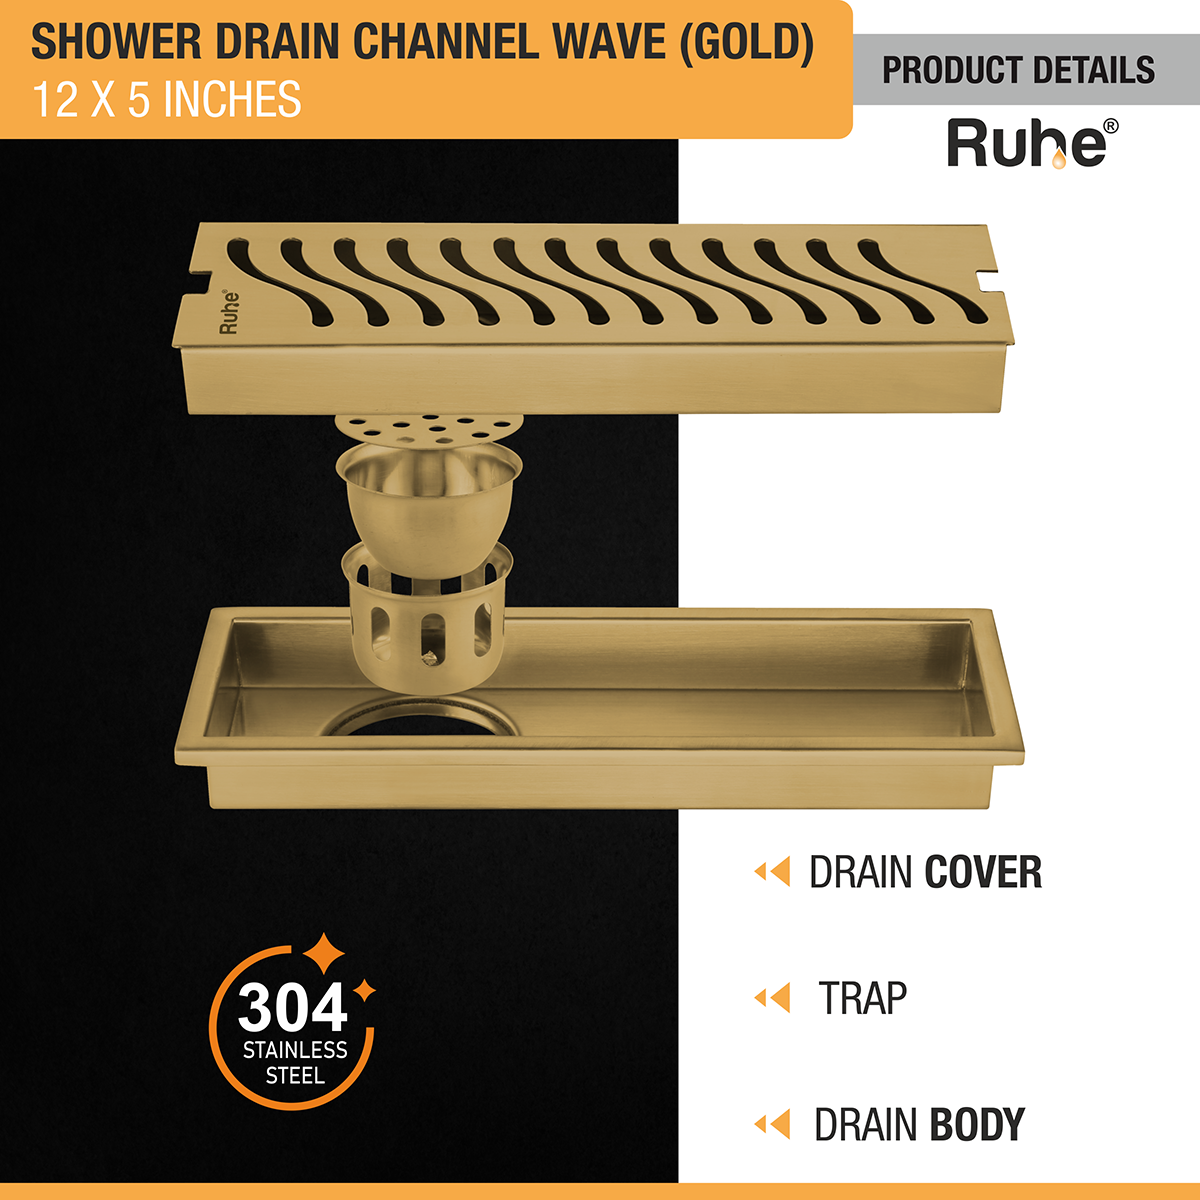 Wave Shower Drain Channel (12 x 5 Inches) YELLOW GOLD product details